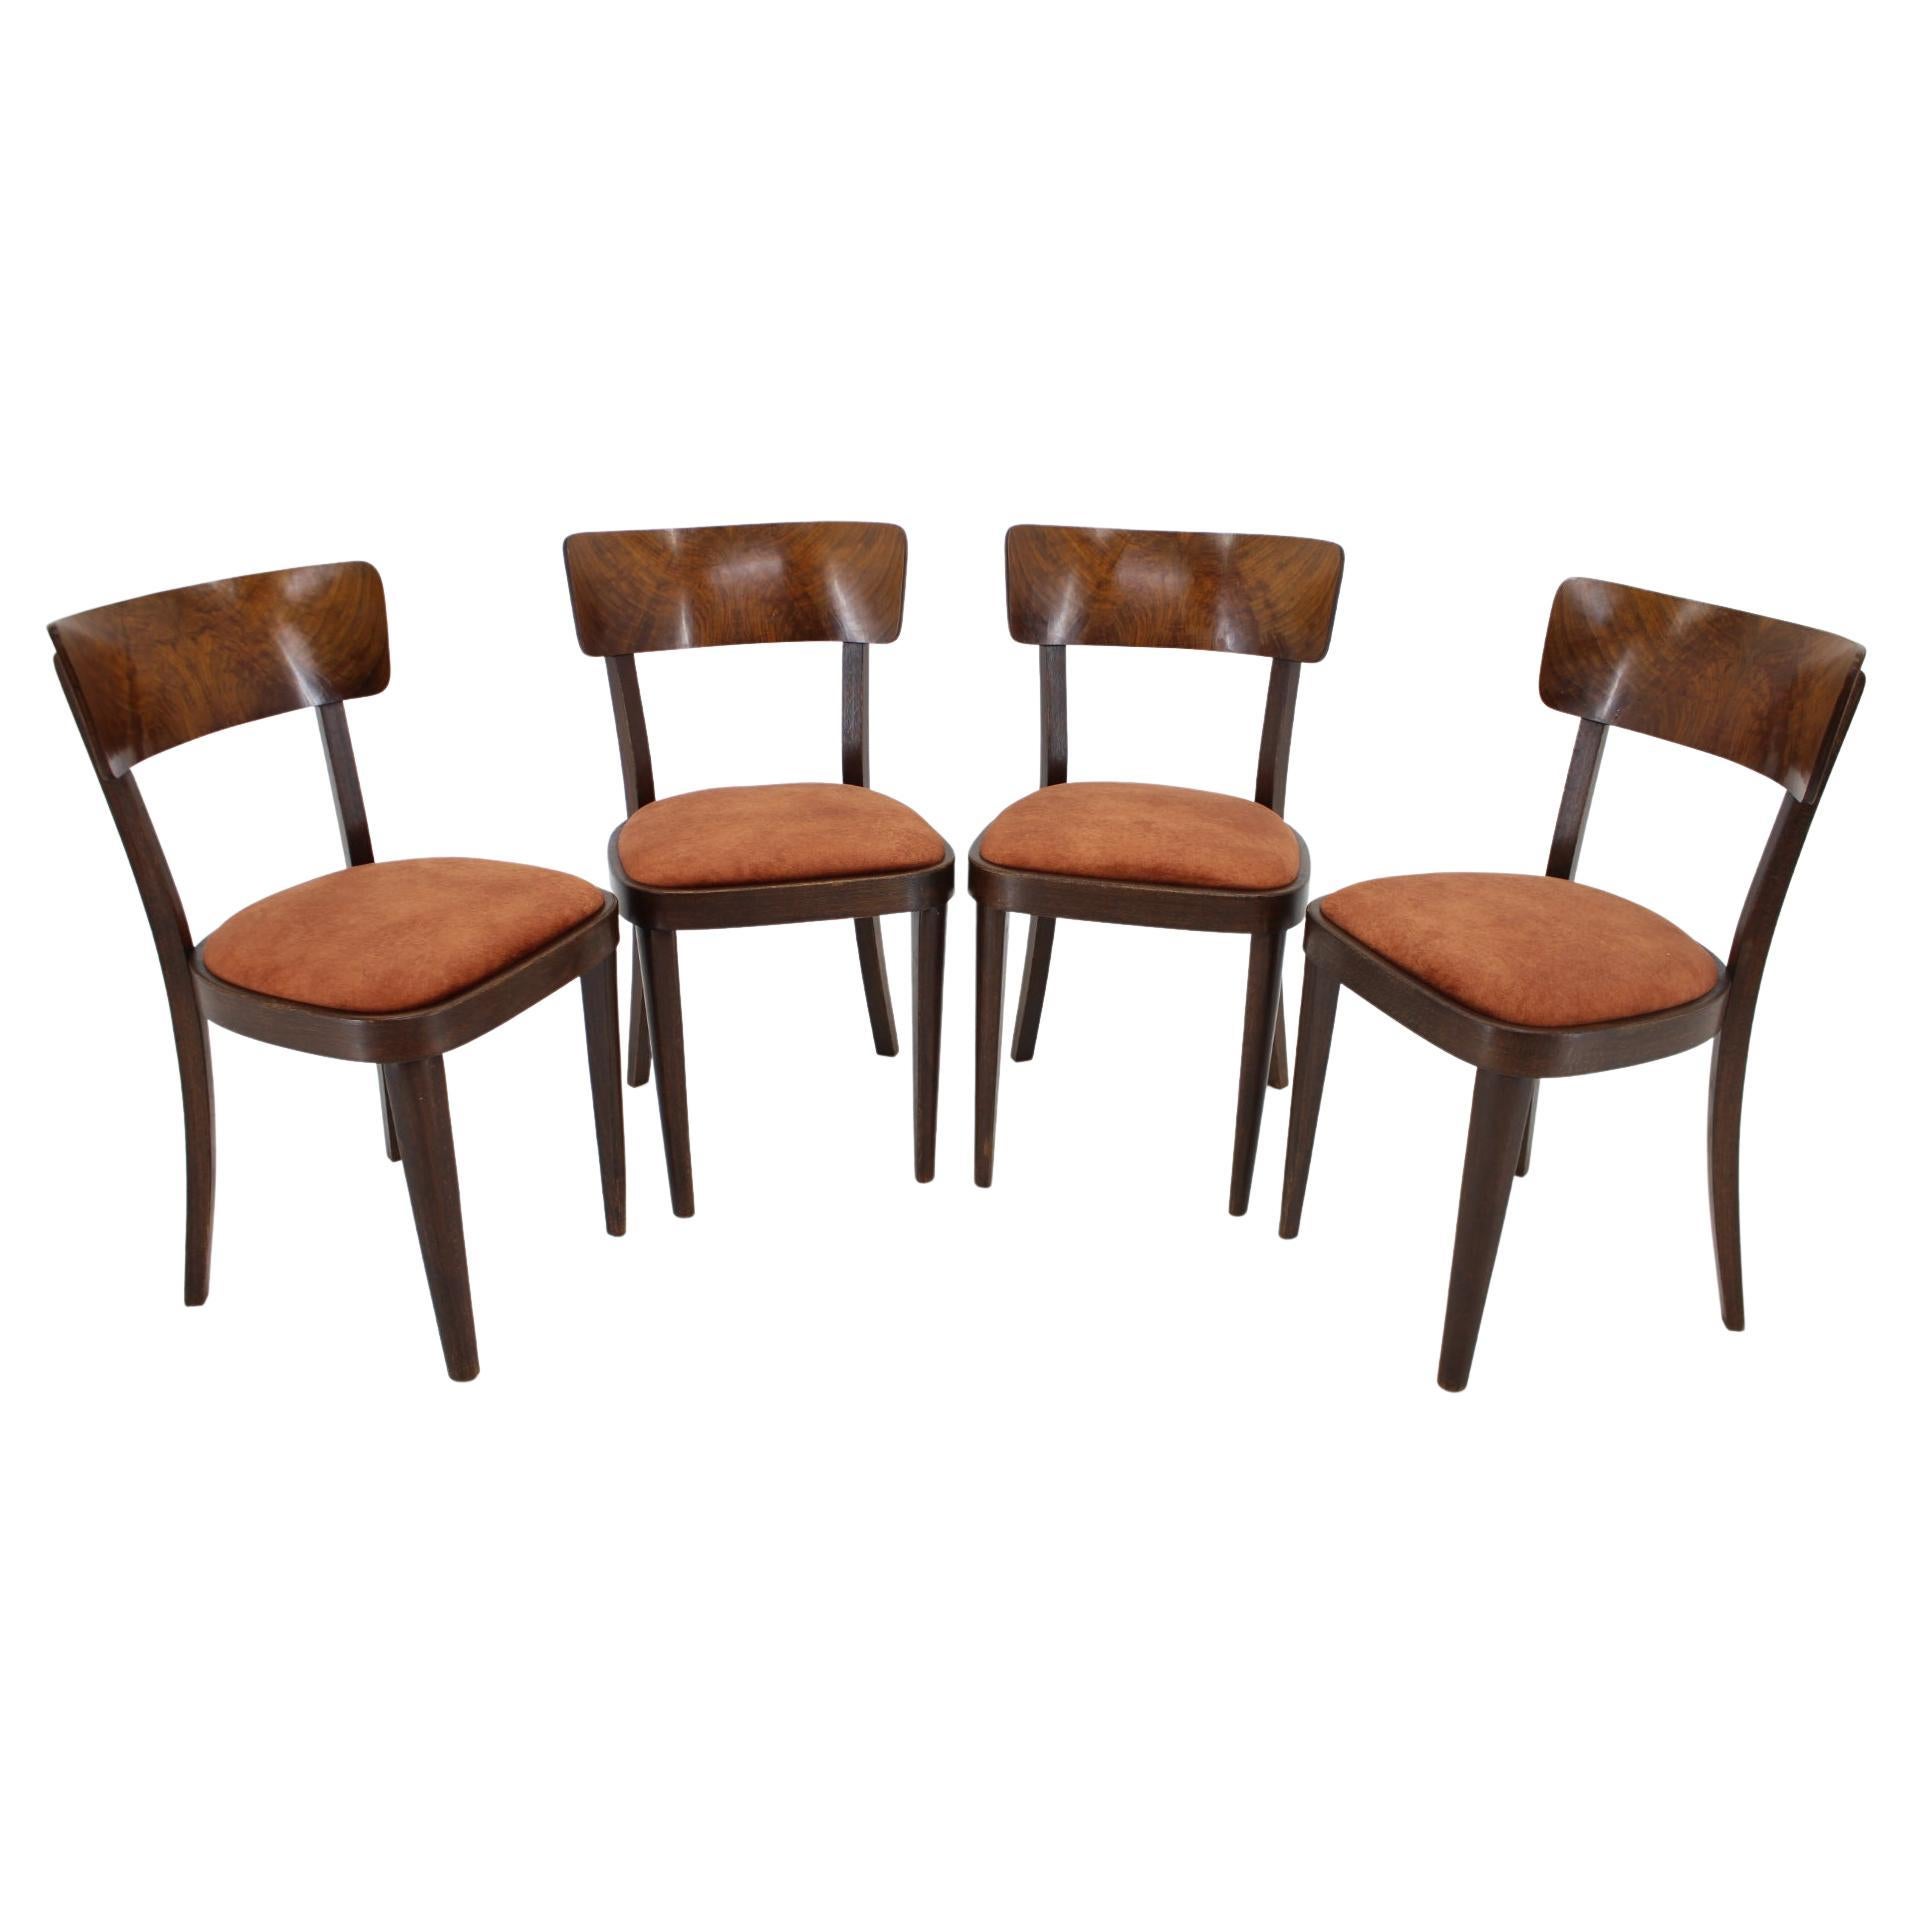 1940s Set of Four Dining Chairs, Czechoslovakia